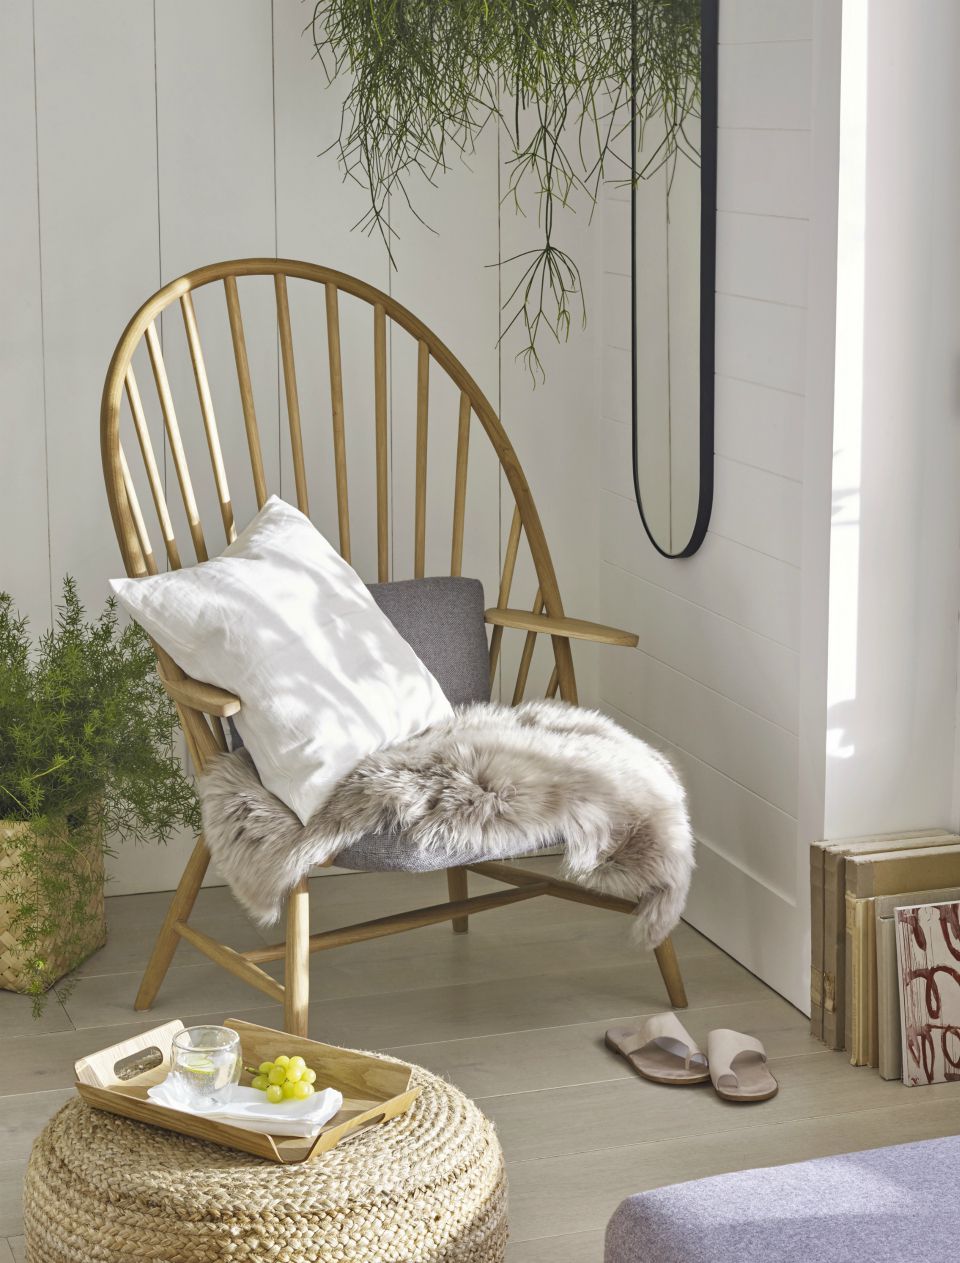 Wooden chair with soft furnishings